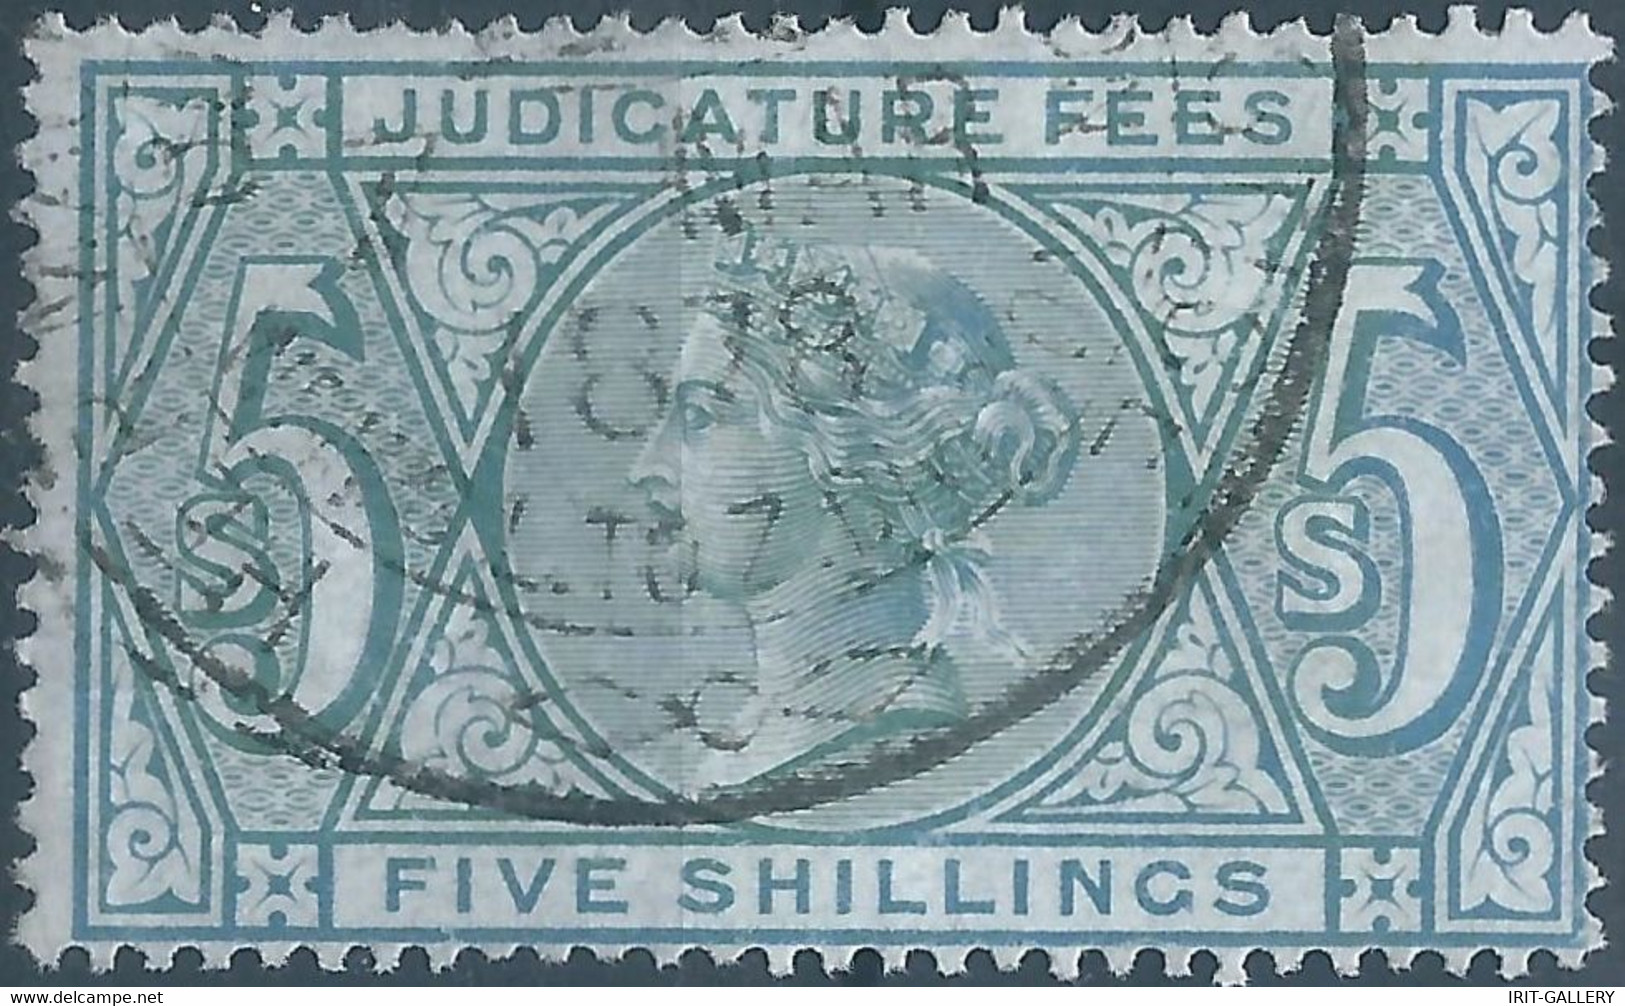 Great Britain-ENGLAND,Queen Victoria,1880-1900 Revenue Stamp Tax Fiscal,JUDICATURE FEES, 5 Shillings,Used - Fiscales